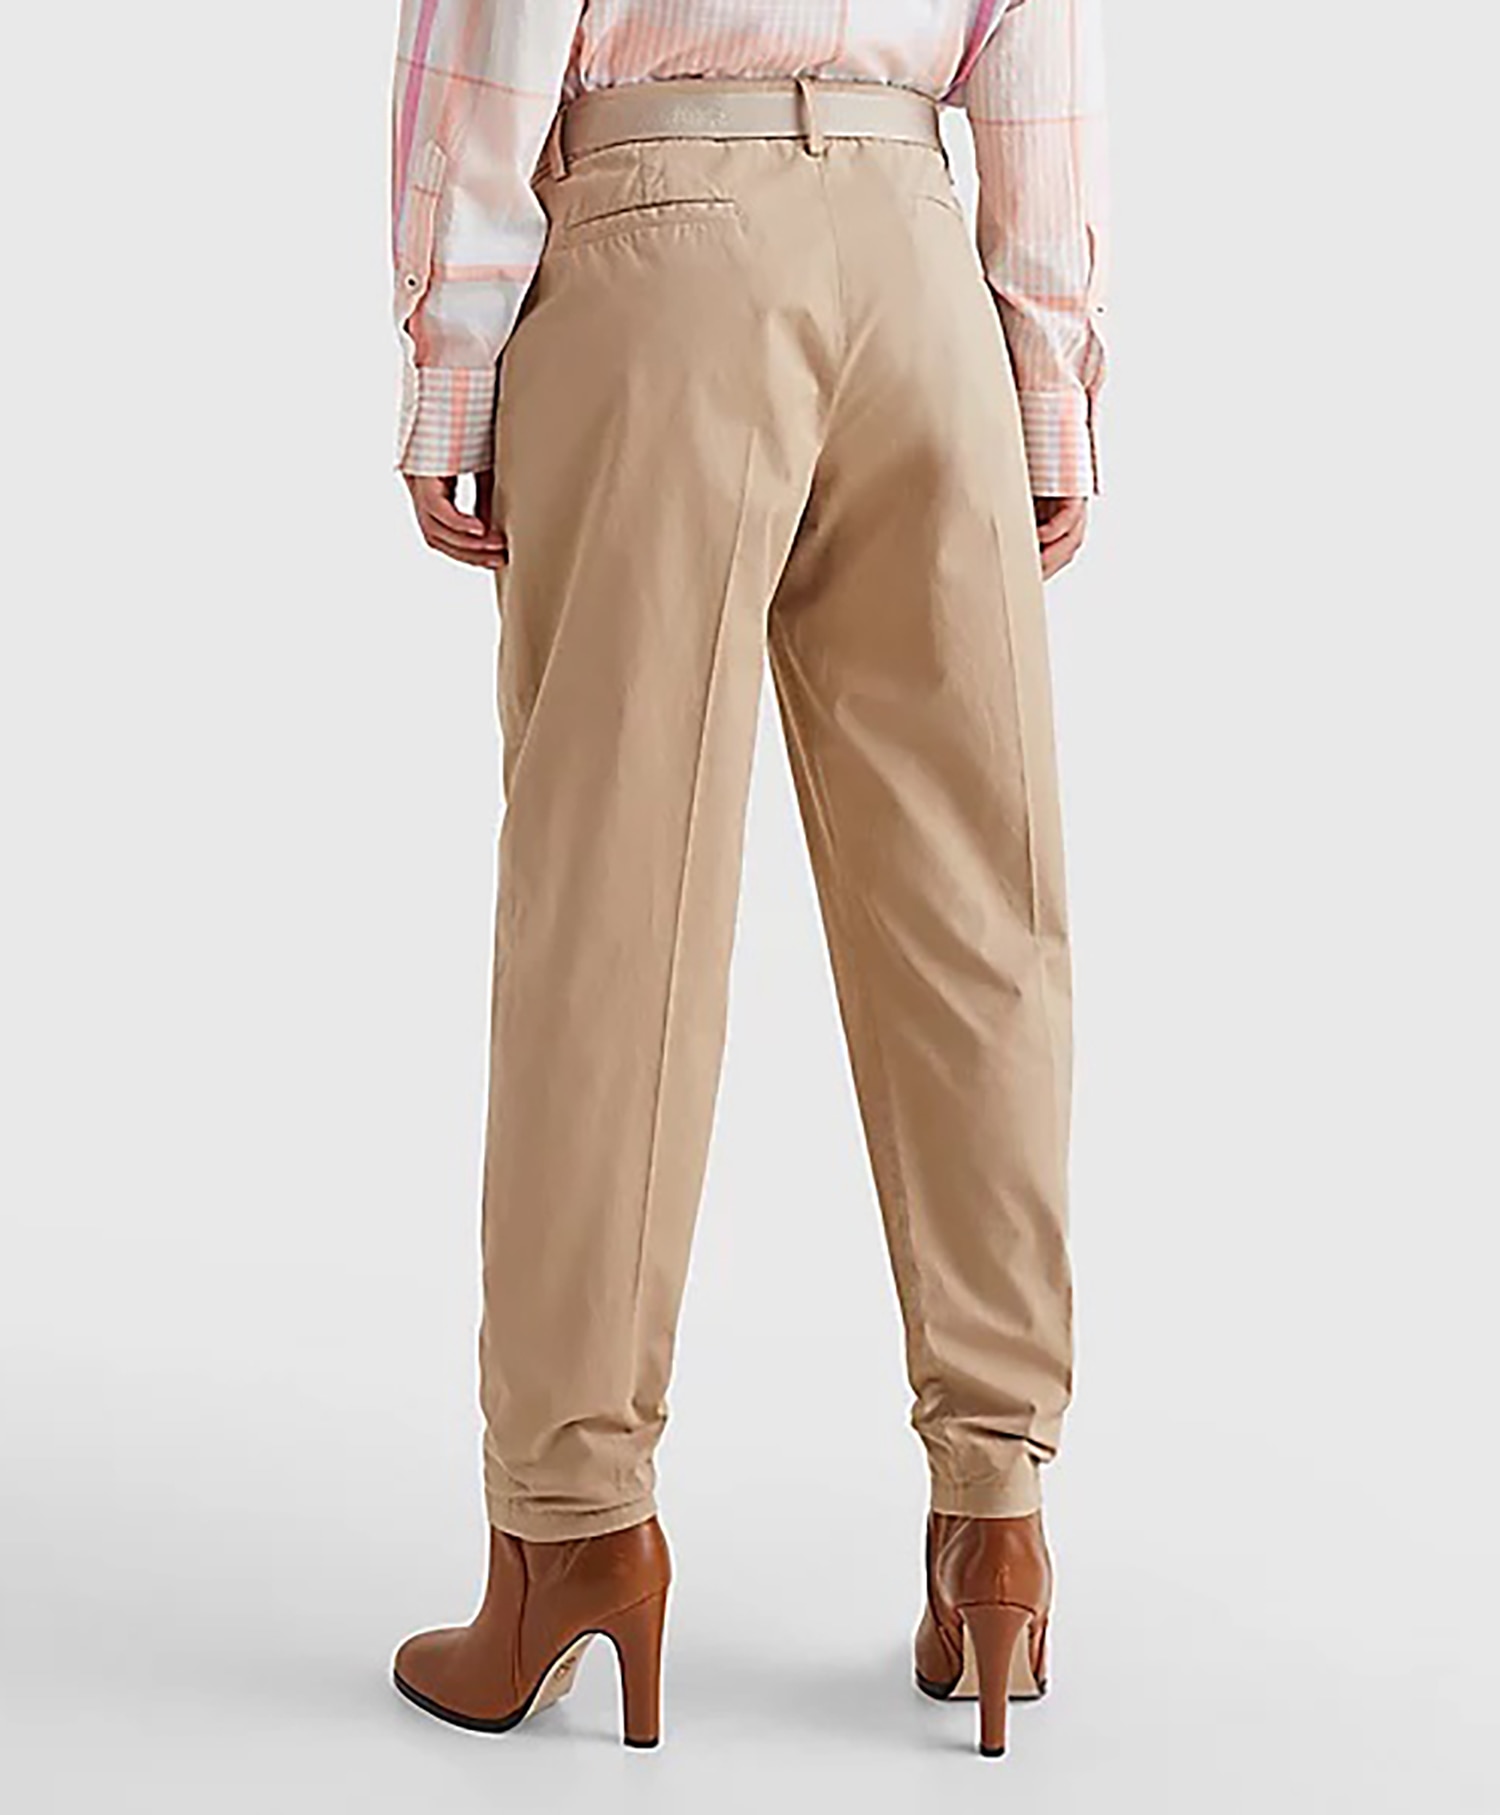 Hilfiger Michelle Tapered Pant